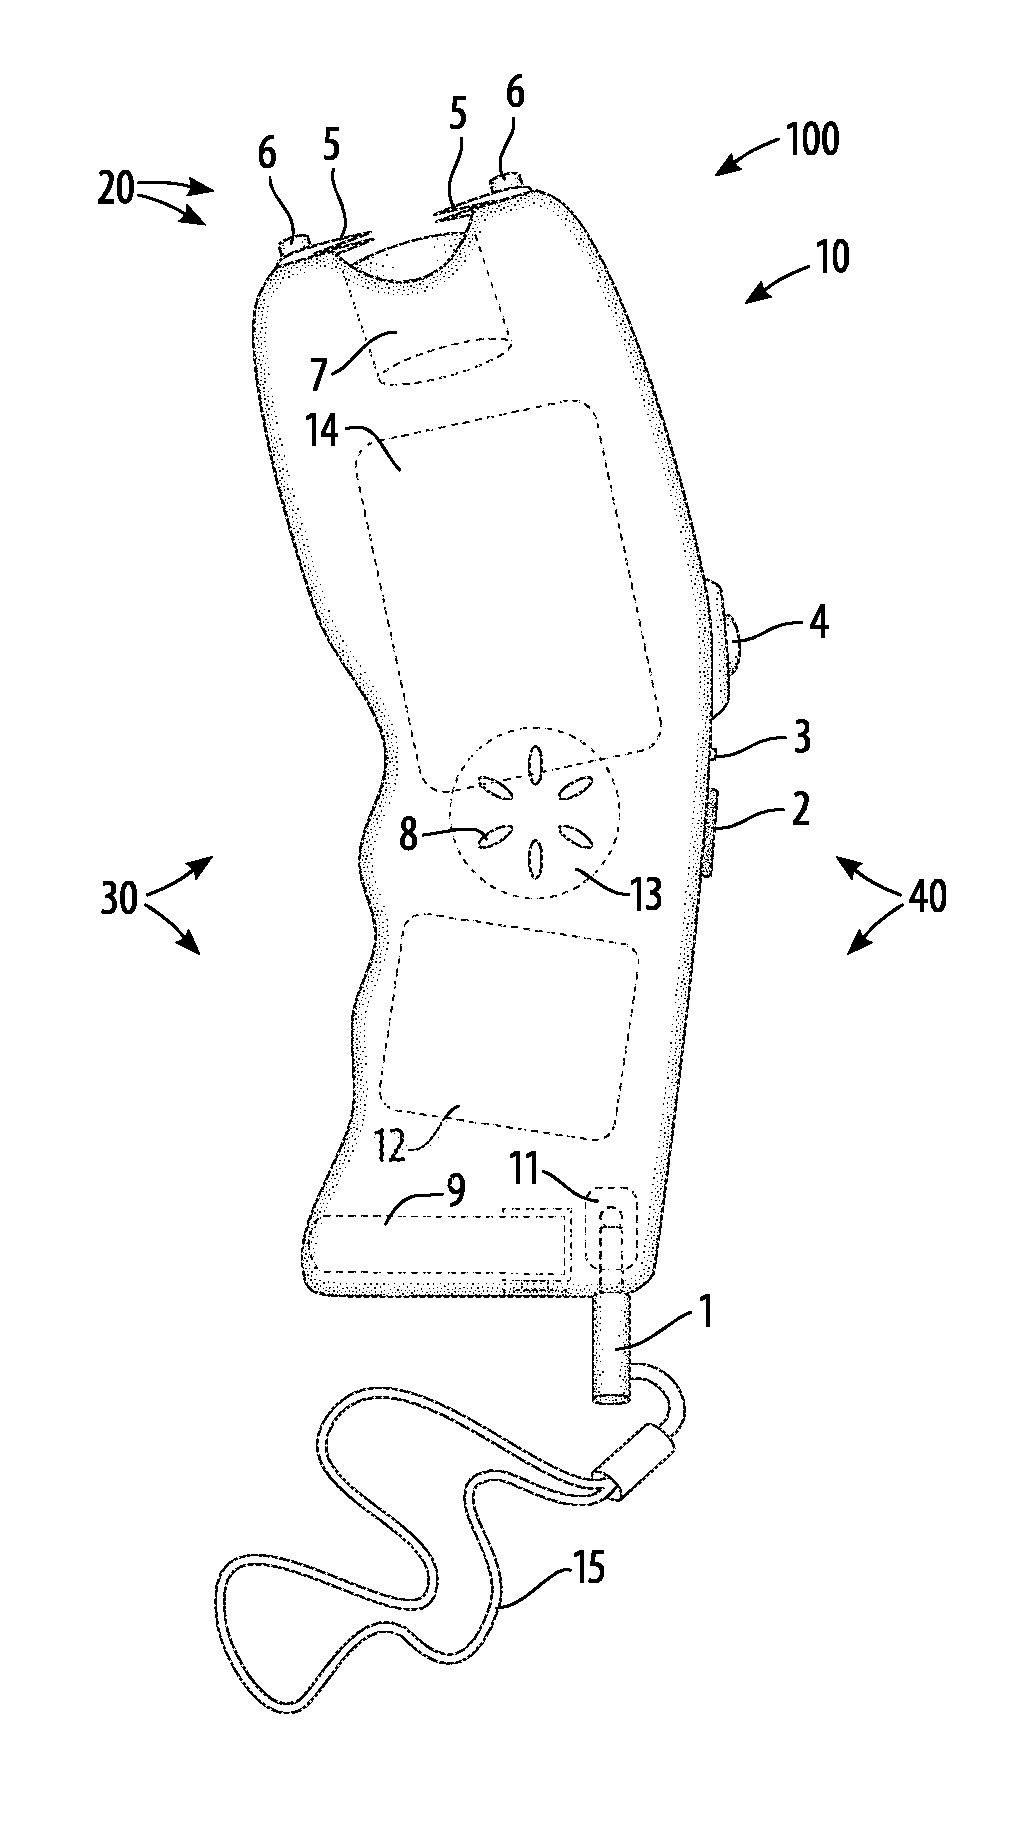 Hand-held personal-protection shock device